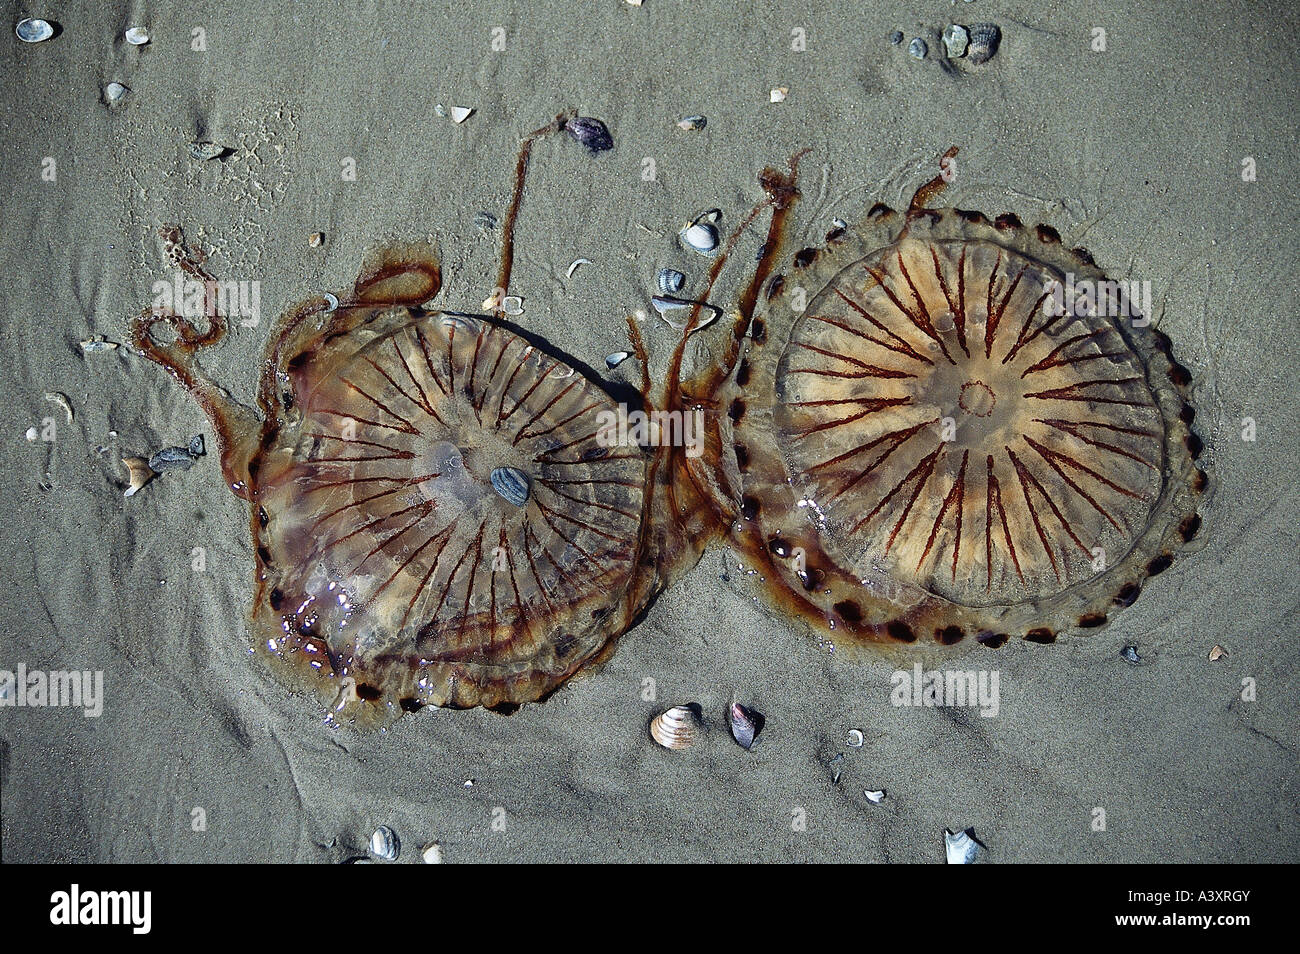 zoology / animals, cnidaria, Compass Jellyfish, (Chrysaora hysoscella), two jellyfish in sand, view from top, close-up, distribu Stock Photo